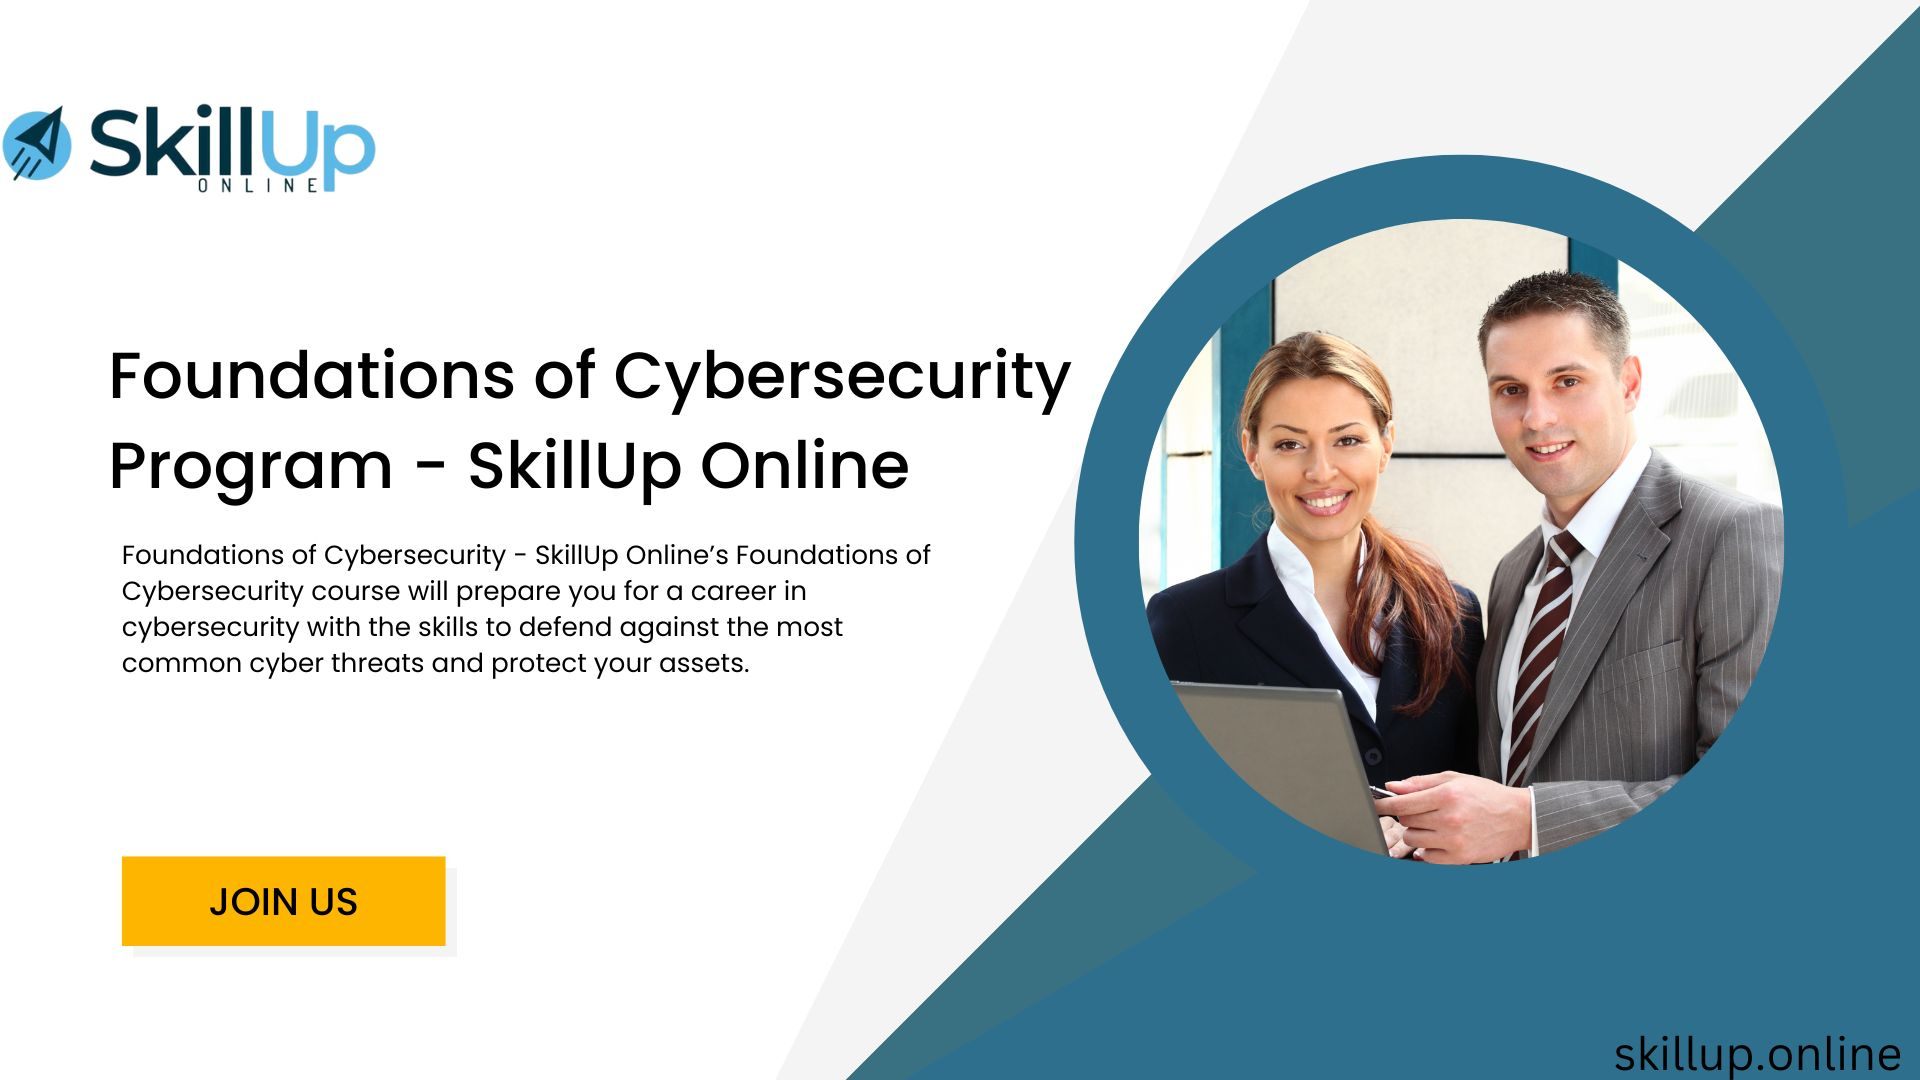 Foundations of Cybersecurity Program - SkillUp Online